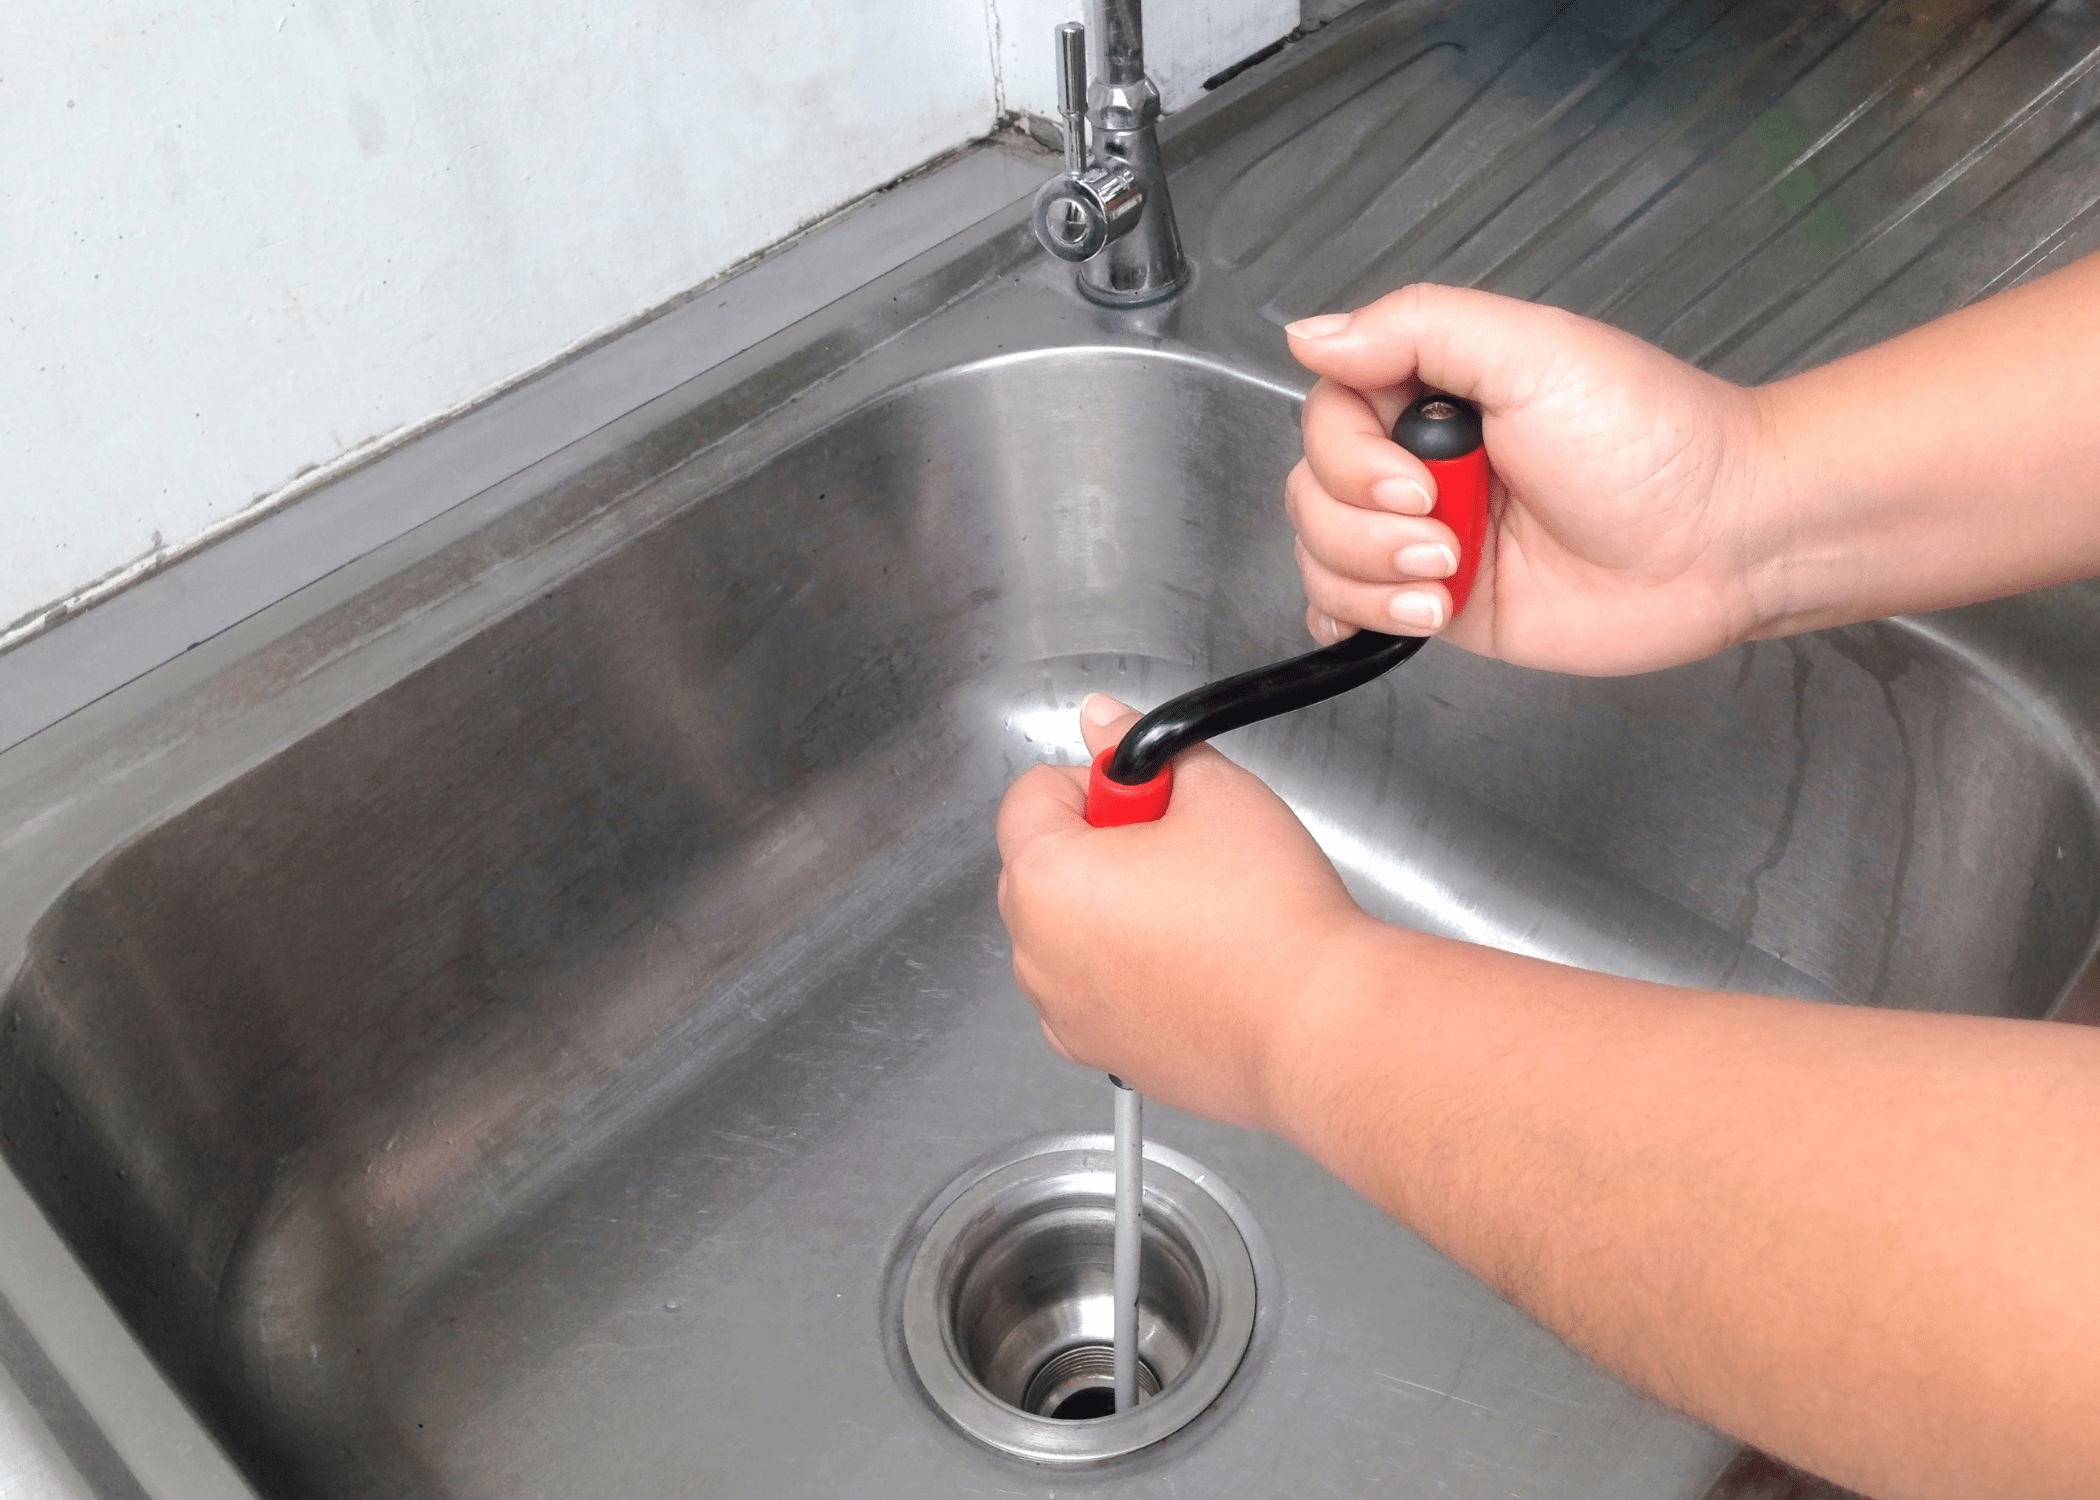 clogged drain hands using snake to unclog